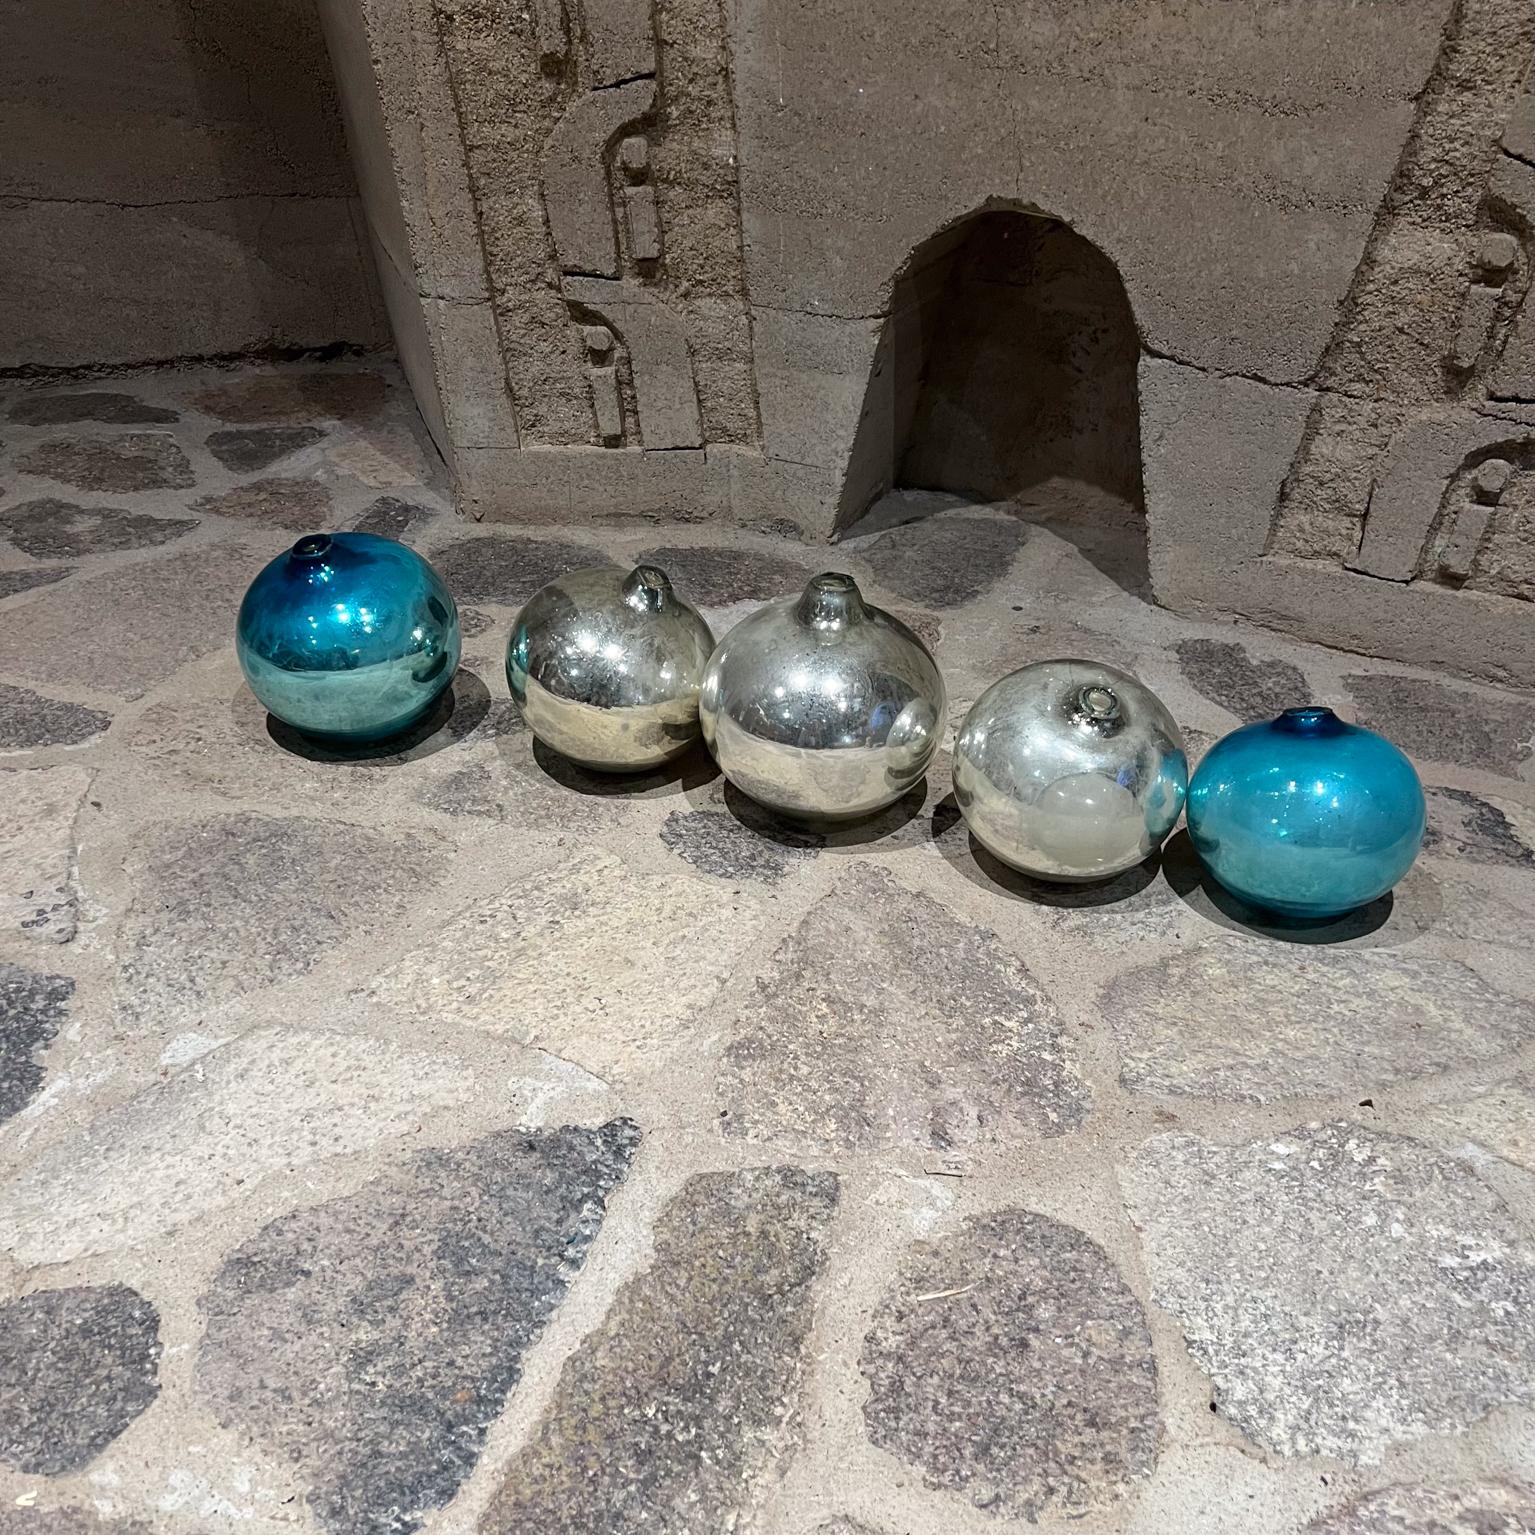 1960s Set of Five Hand Blown Mercury Glass Gazing Spheres Mexico
Largest 8 diameter x 8 h, smallest 7 diameter x 7 h
5 mercury colored glass globes. 
Crafted in Handblown glass.
No stamp or label present from the maker.
Inspired by fabuloso Luis